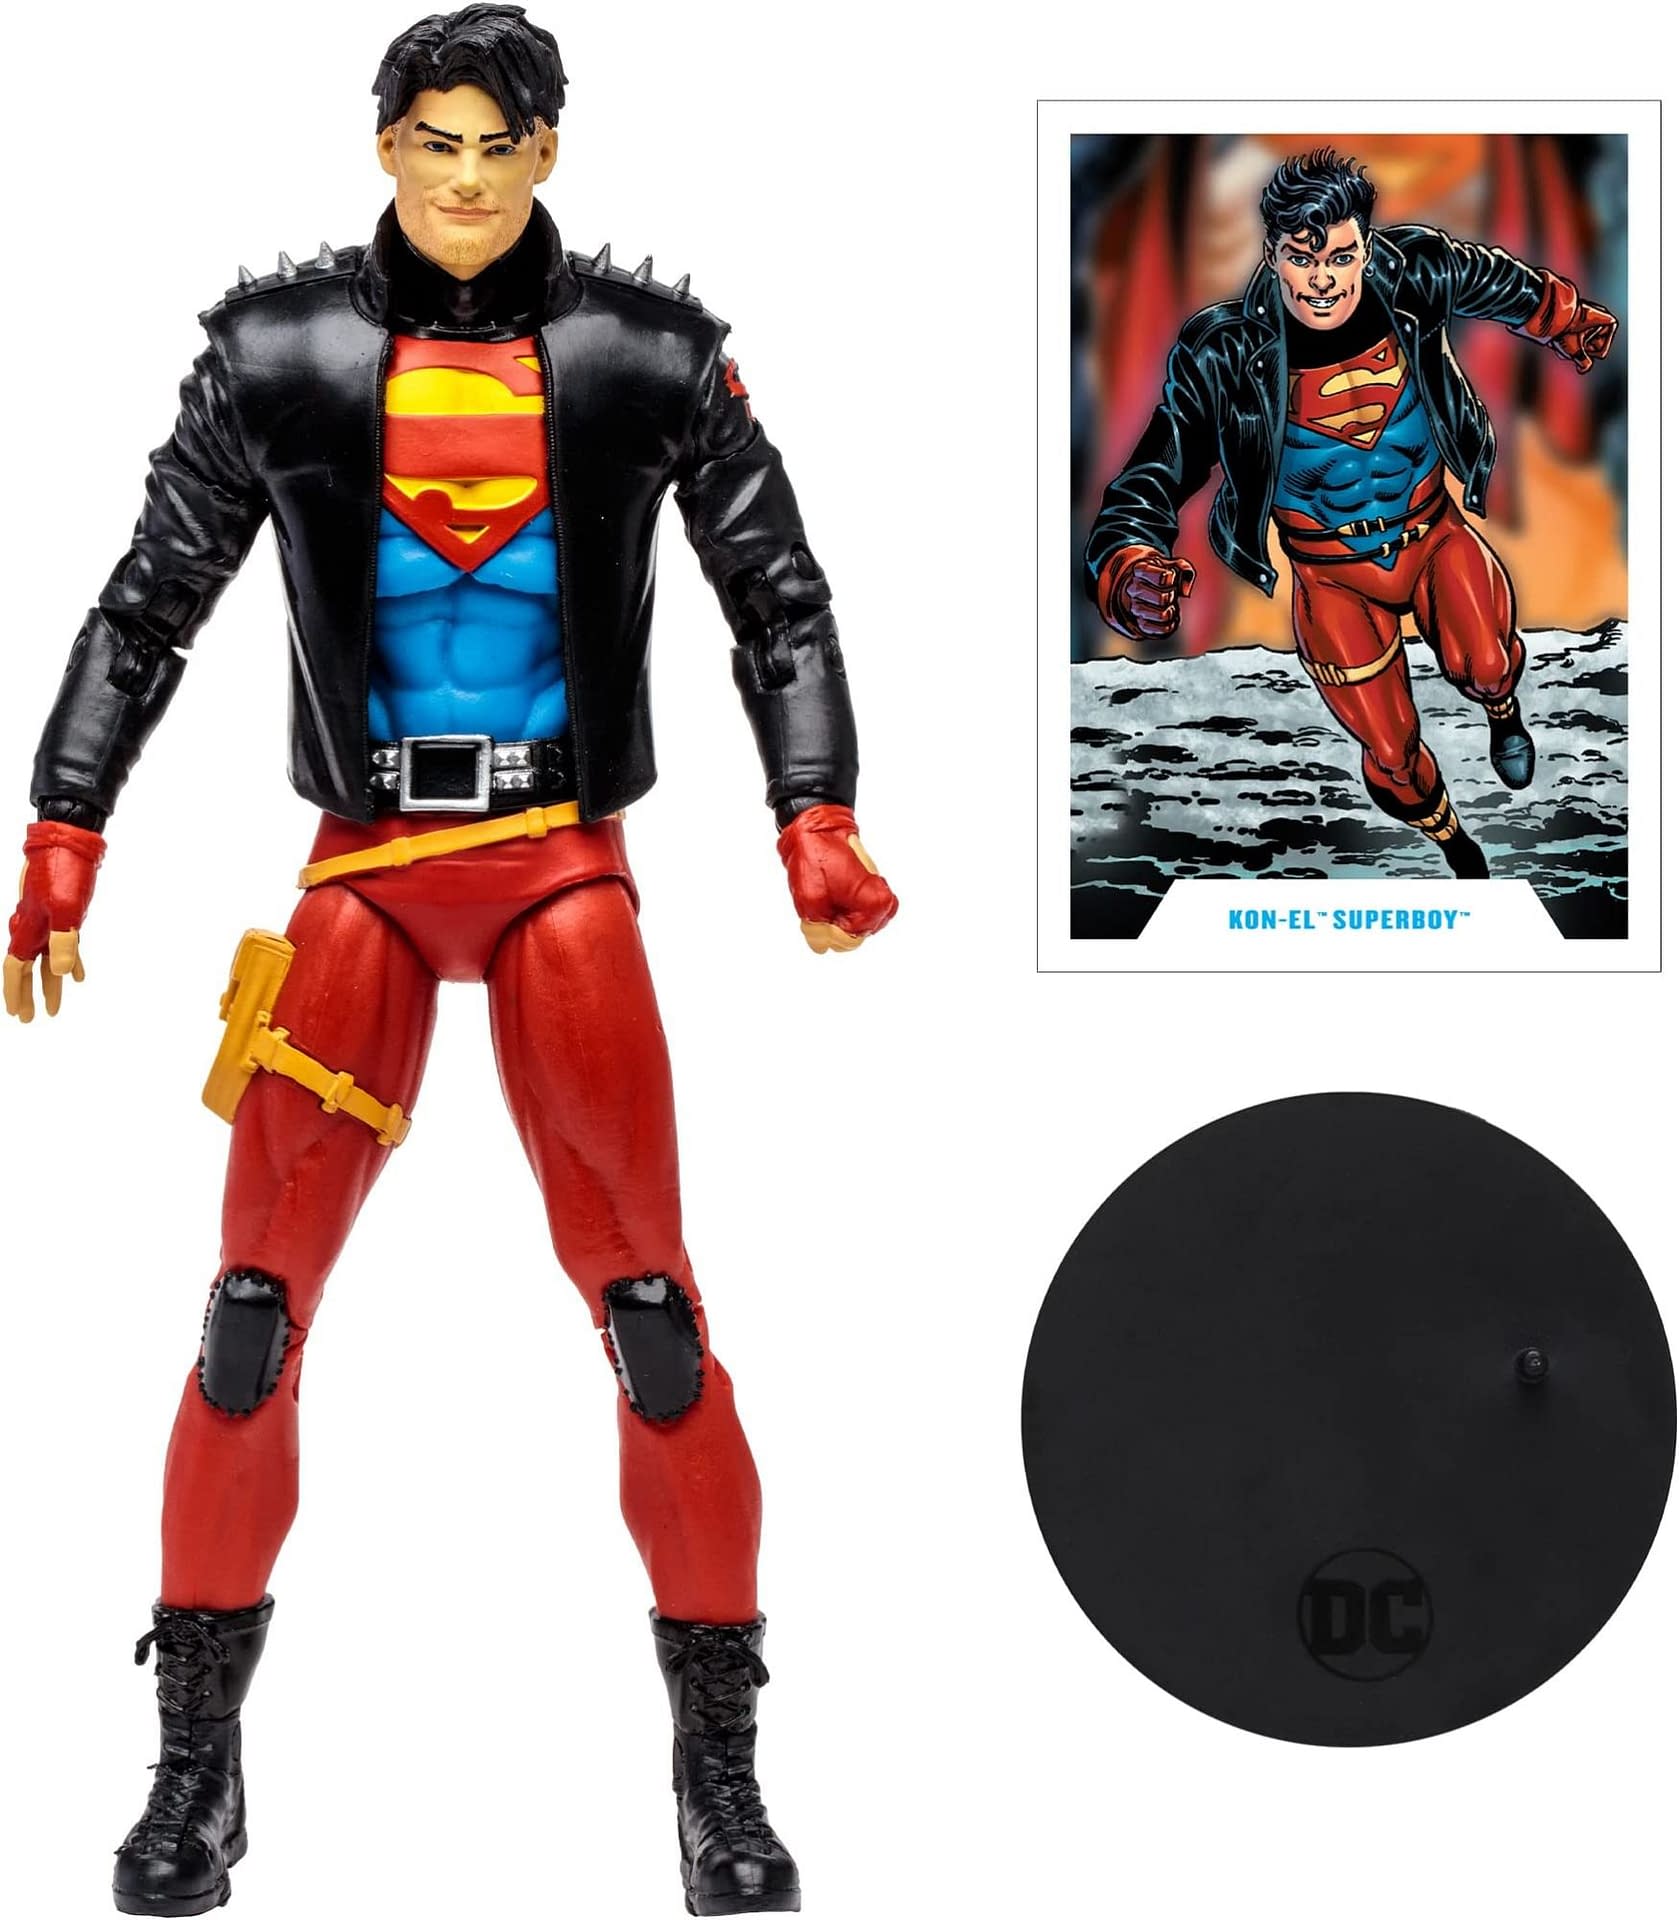 The Superman Clone, Superboy Joins McFarlane Toys DC Multiverse